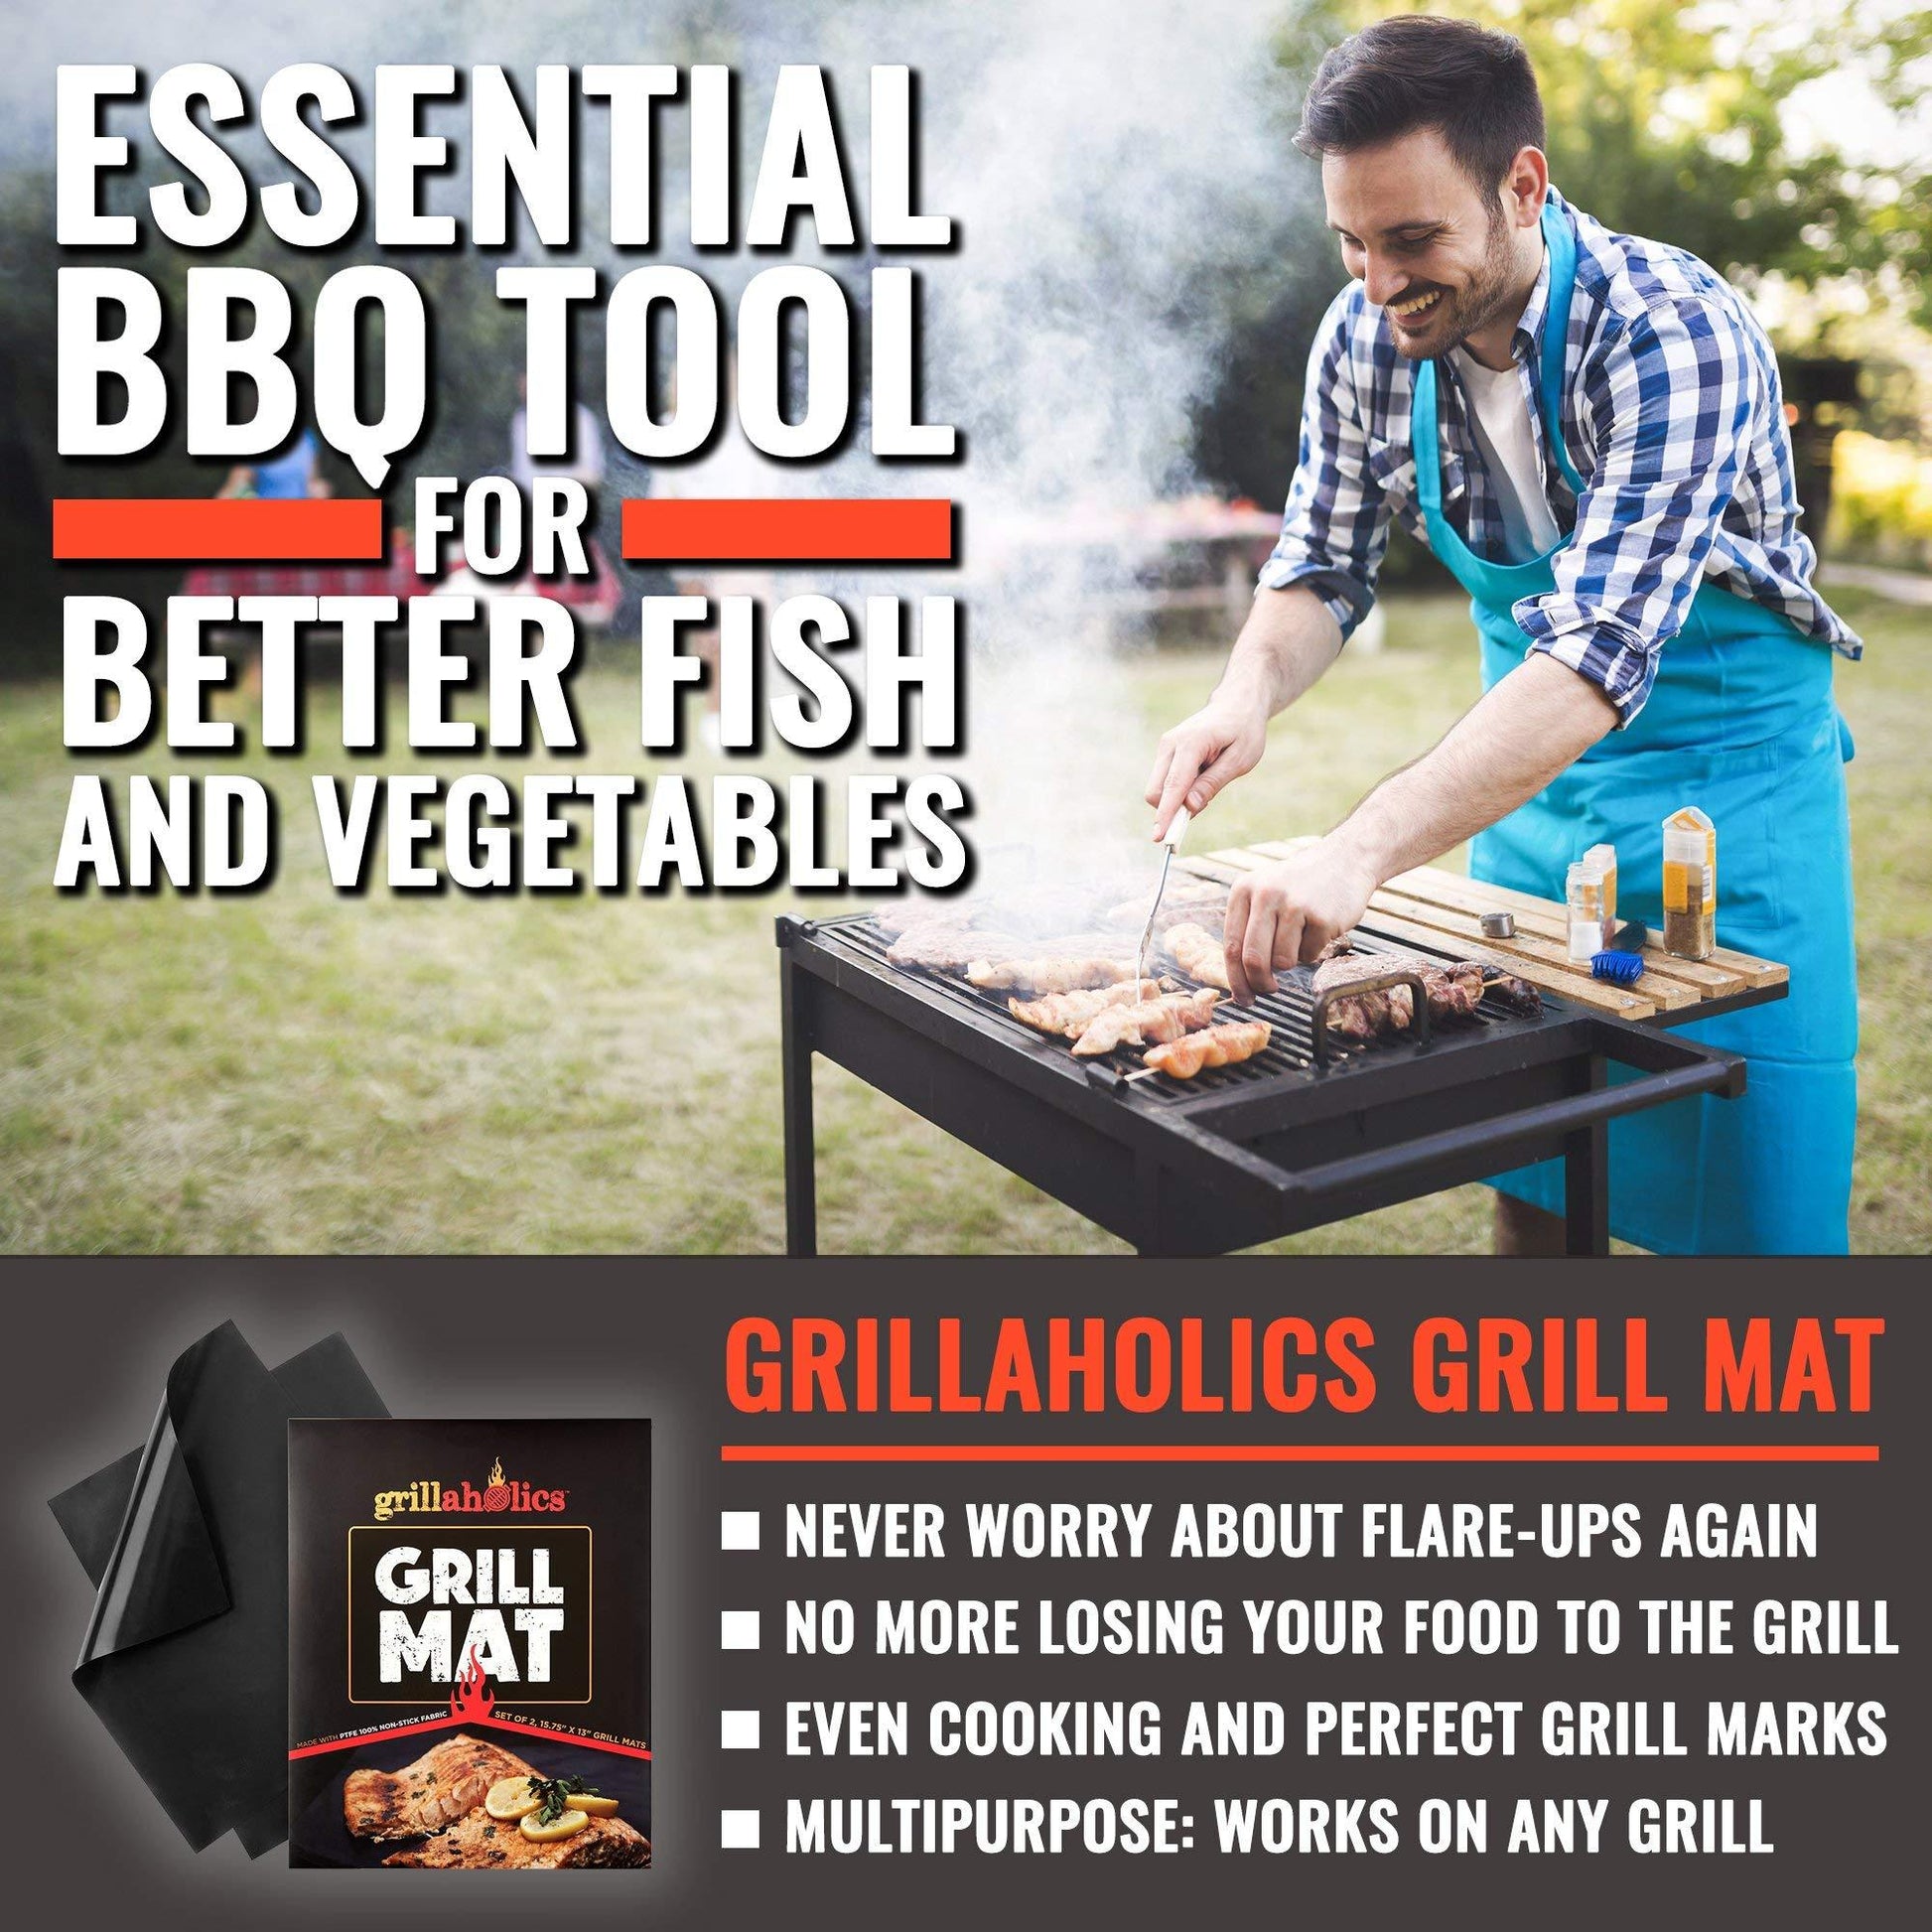 Grillaholics Heavy Duty Grill Mats - Set of 2 BBQ Mats Built to Last - Make Grilling Easier & Keep Grates Looking New - The Perfect Grilling Gift - CookCave